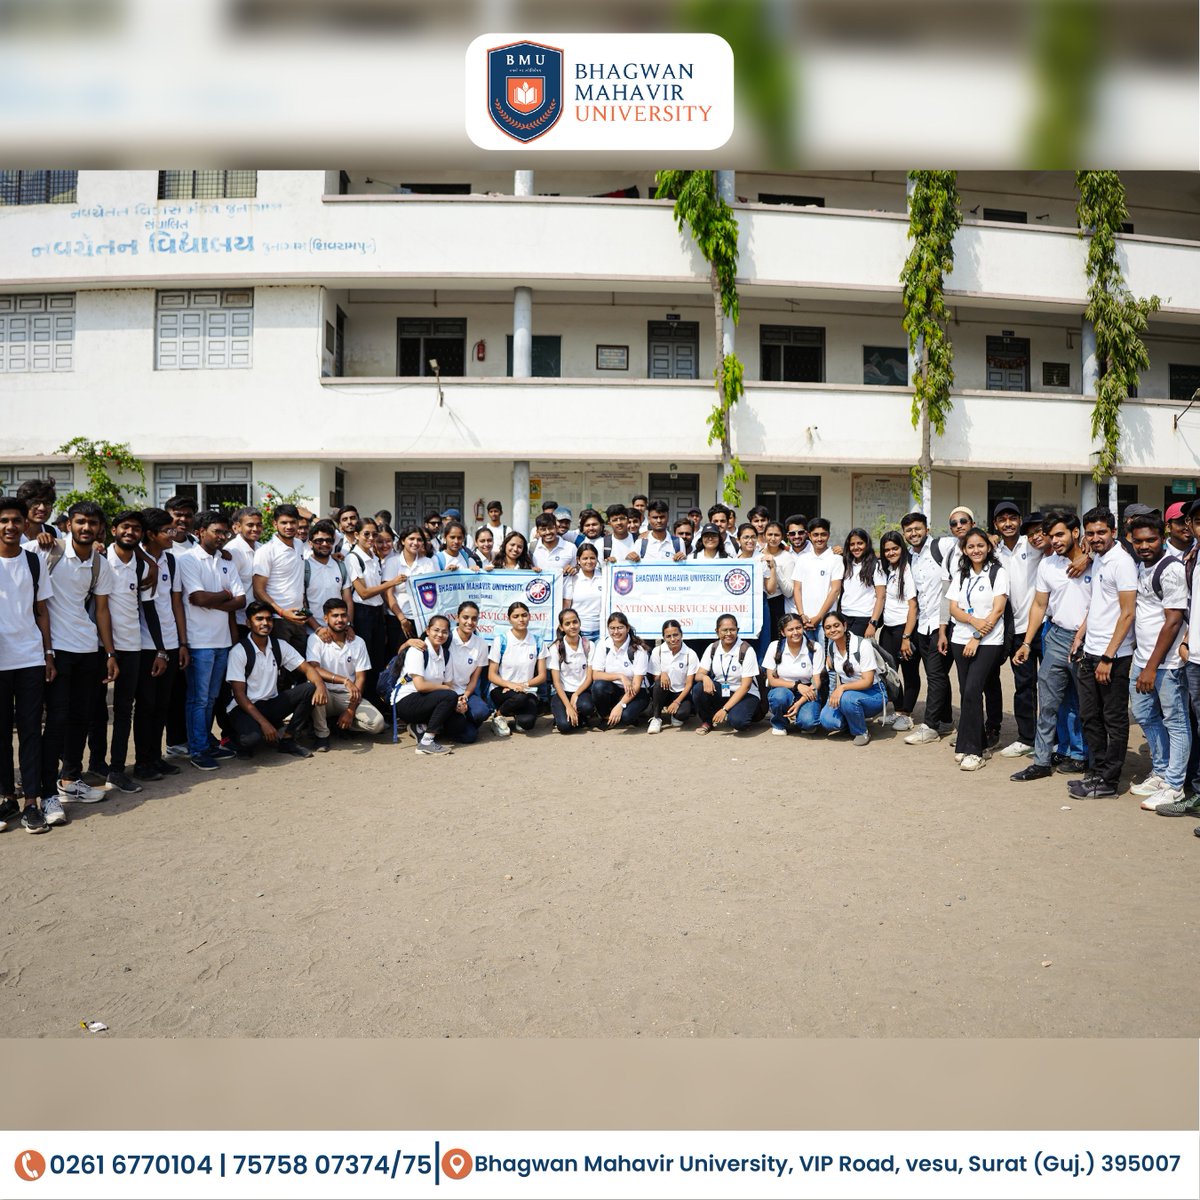 At the NSS special camp organized by the SS Cell, volunteers enjoyed unique opportunities for group living, shared experiences, and meaningful community interactions.

#nsscamp #sscell #sharedexperiences #meaningfulconnections #community #surat #bestuniversityofsurat #lifeatbmu